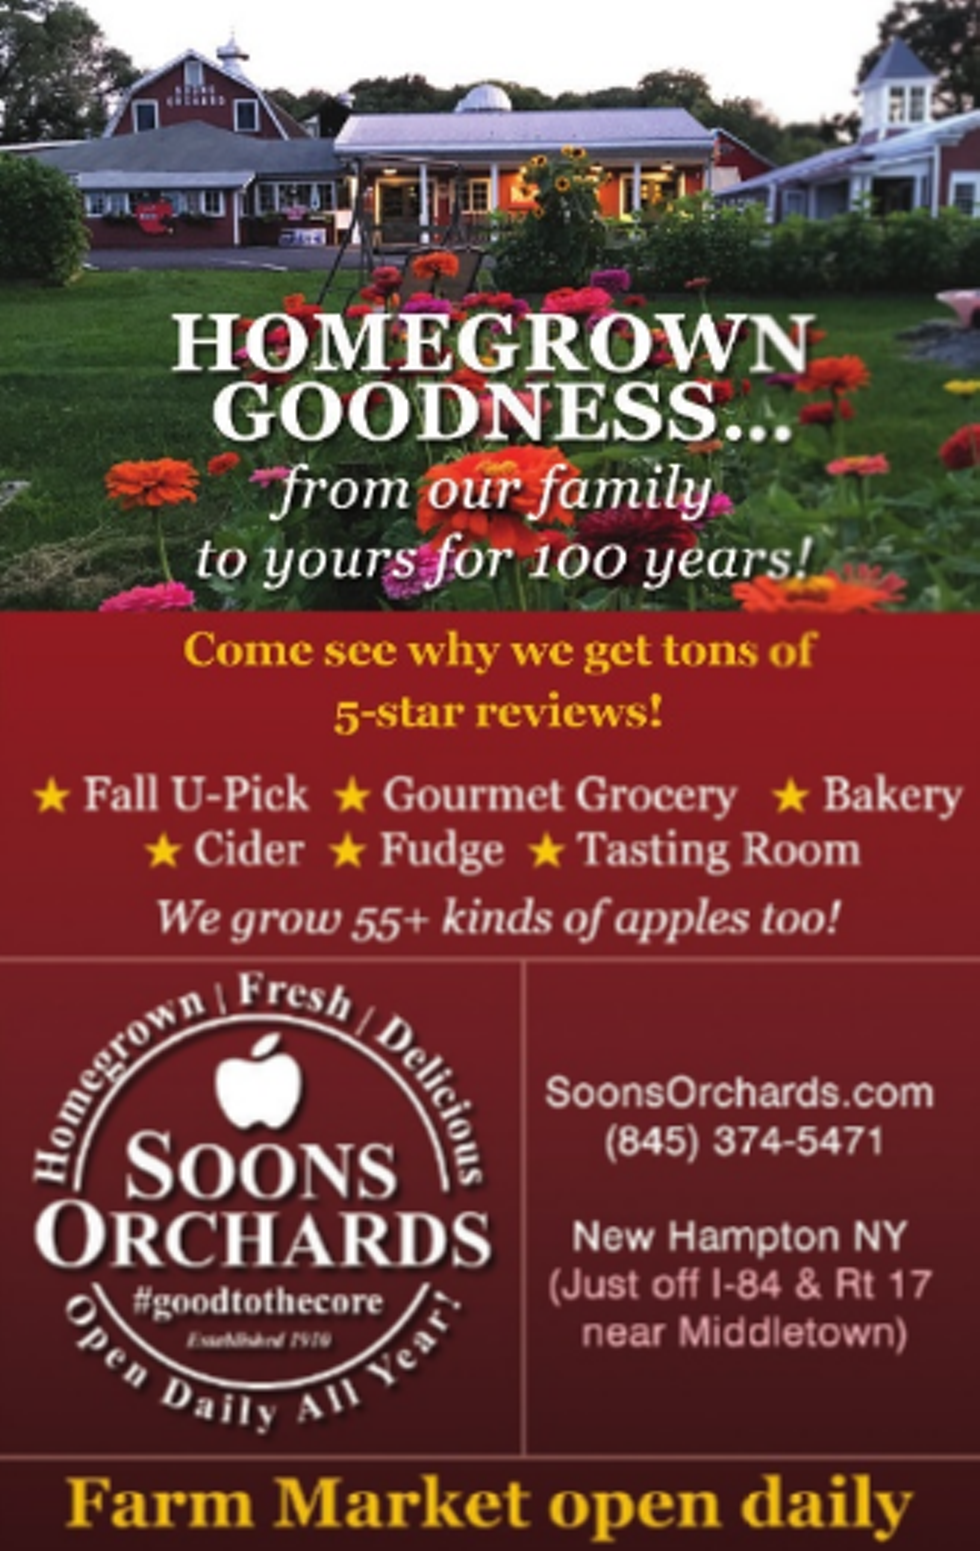 Soons Orchards